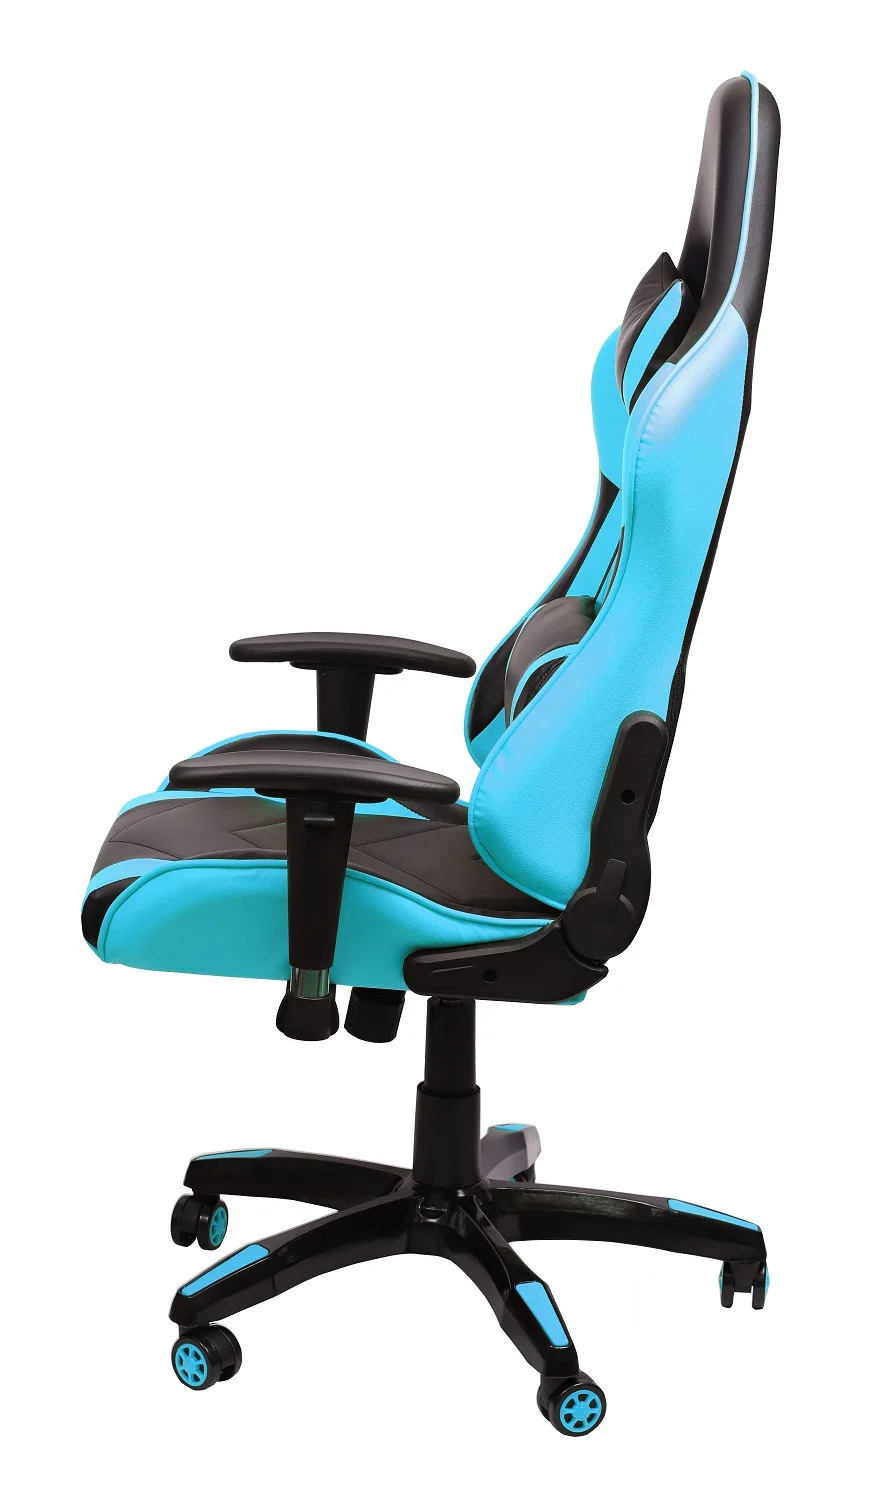 SOKOLTEC New Arrival Racing Synthetic Leather Gaming Chair Internet Cafes WCG Computer Chair Comfortable Lying Household Chair